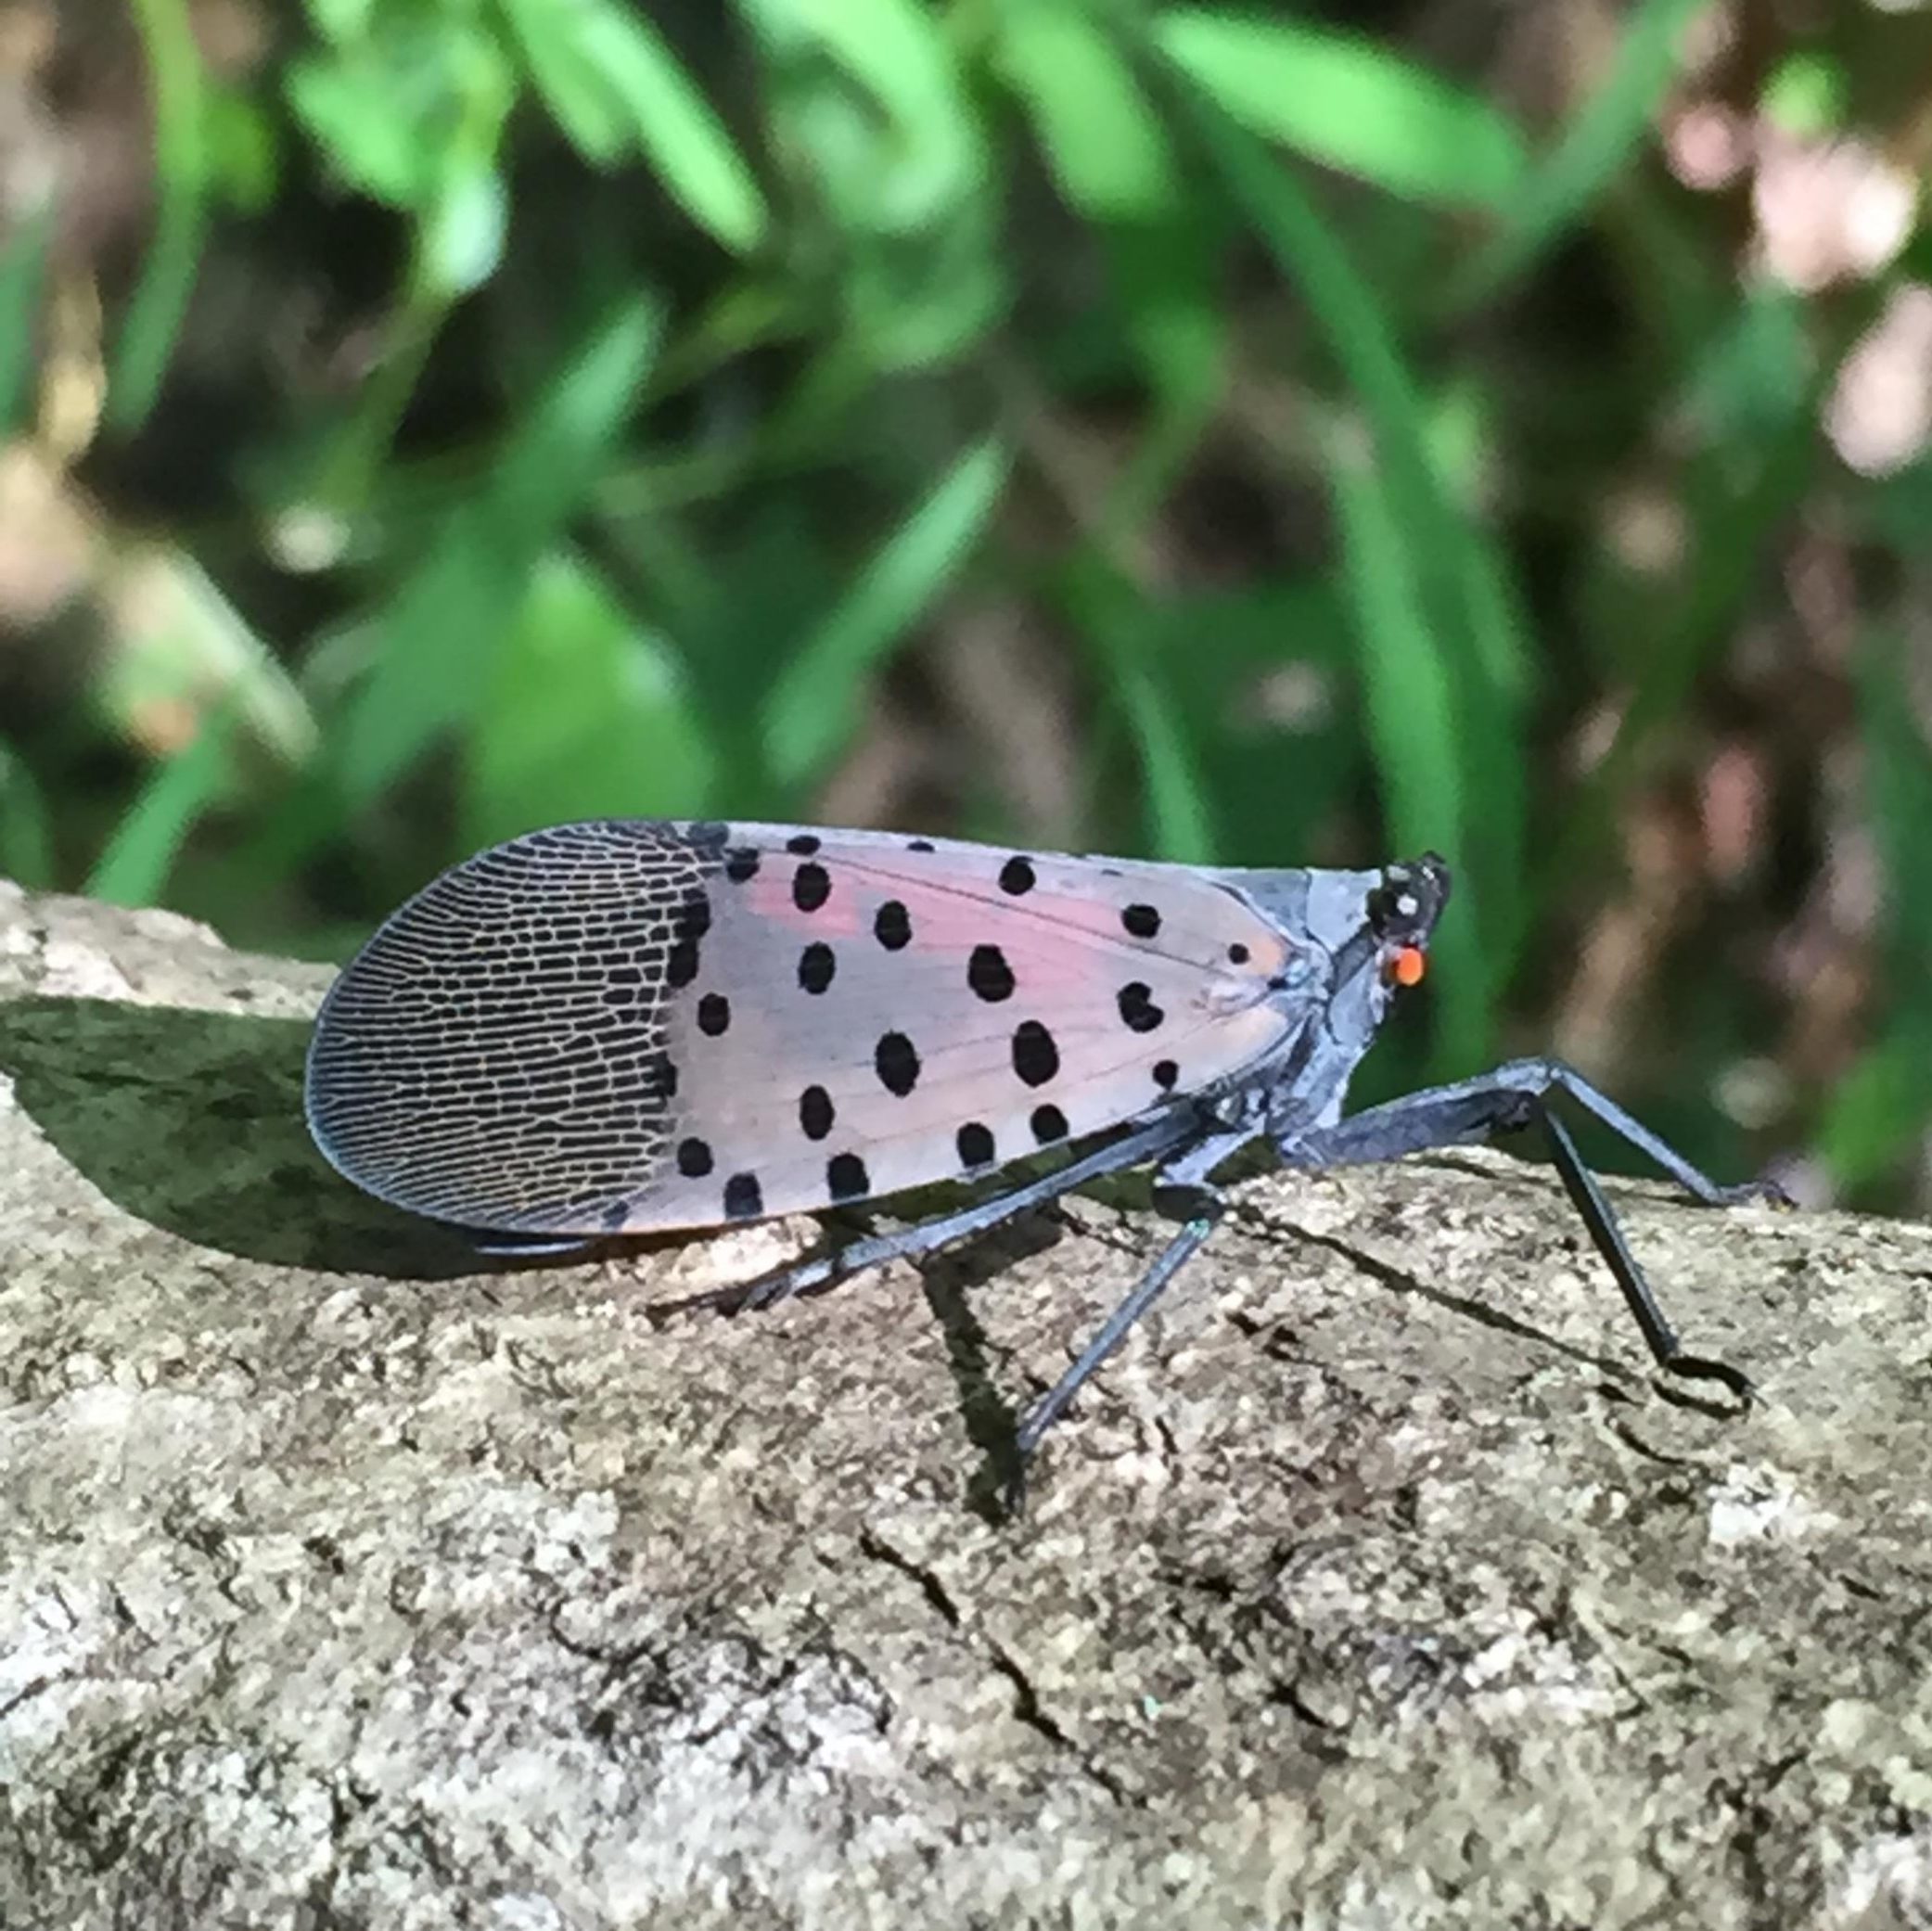 Adult spotted lanternfly on a log